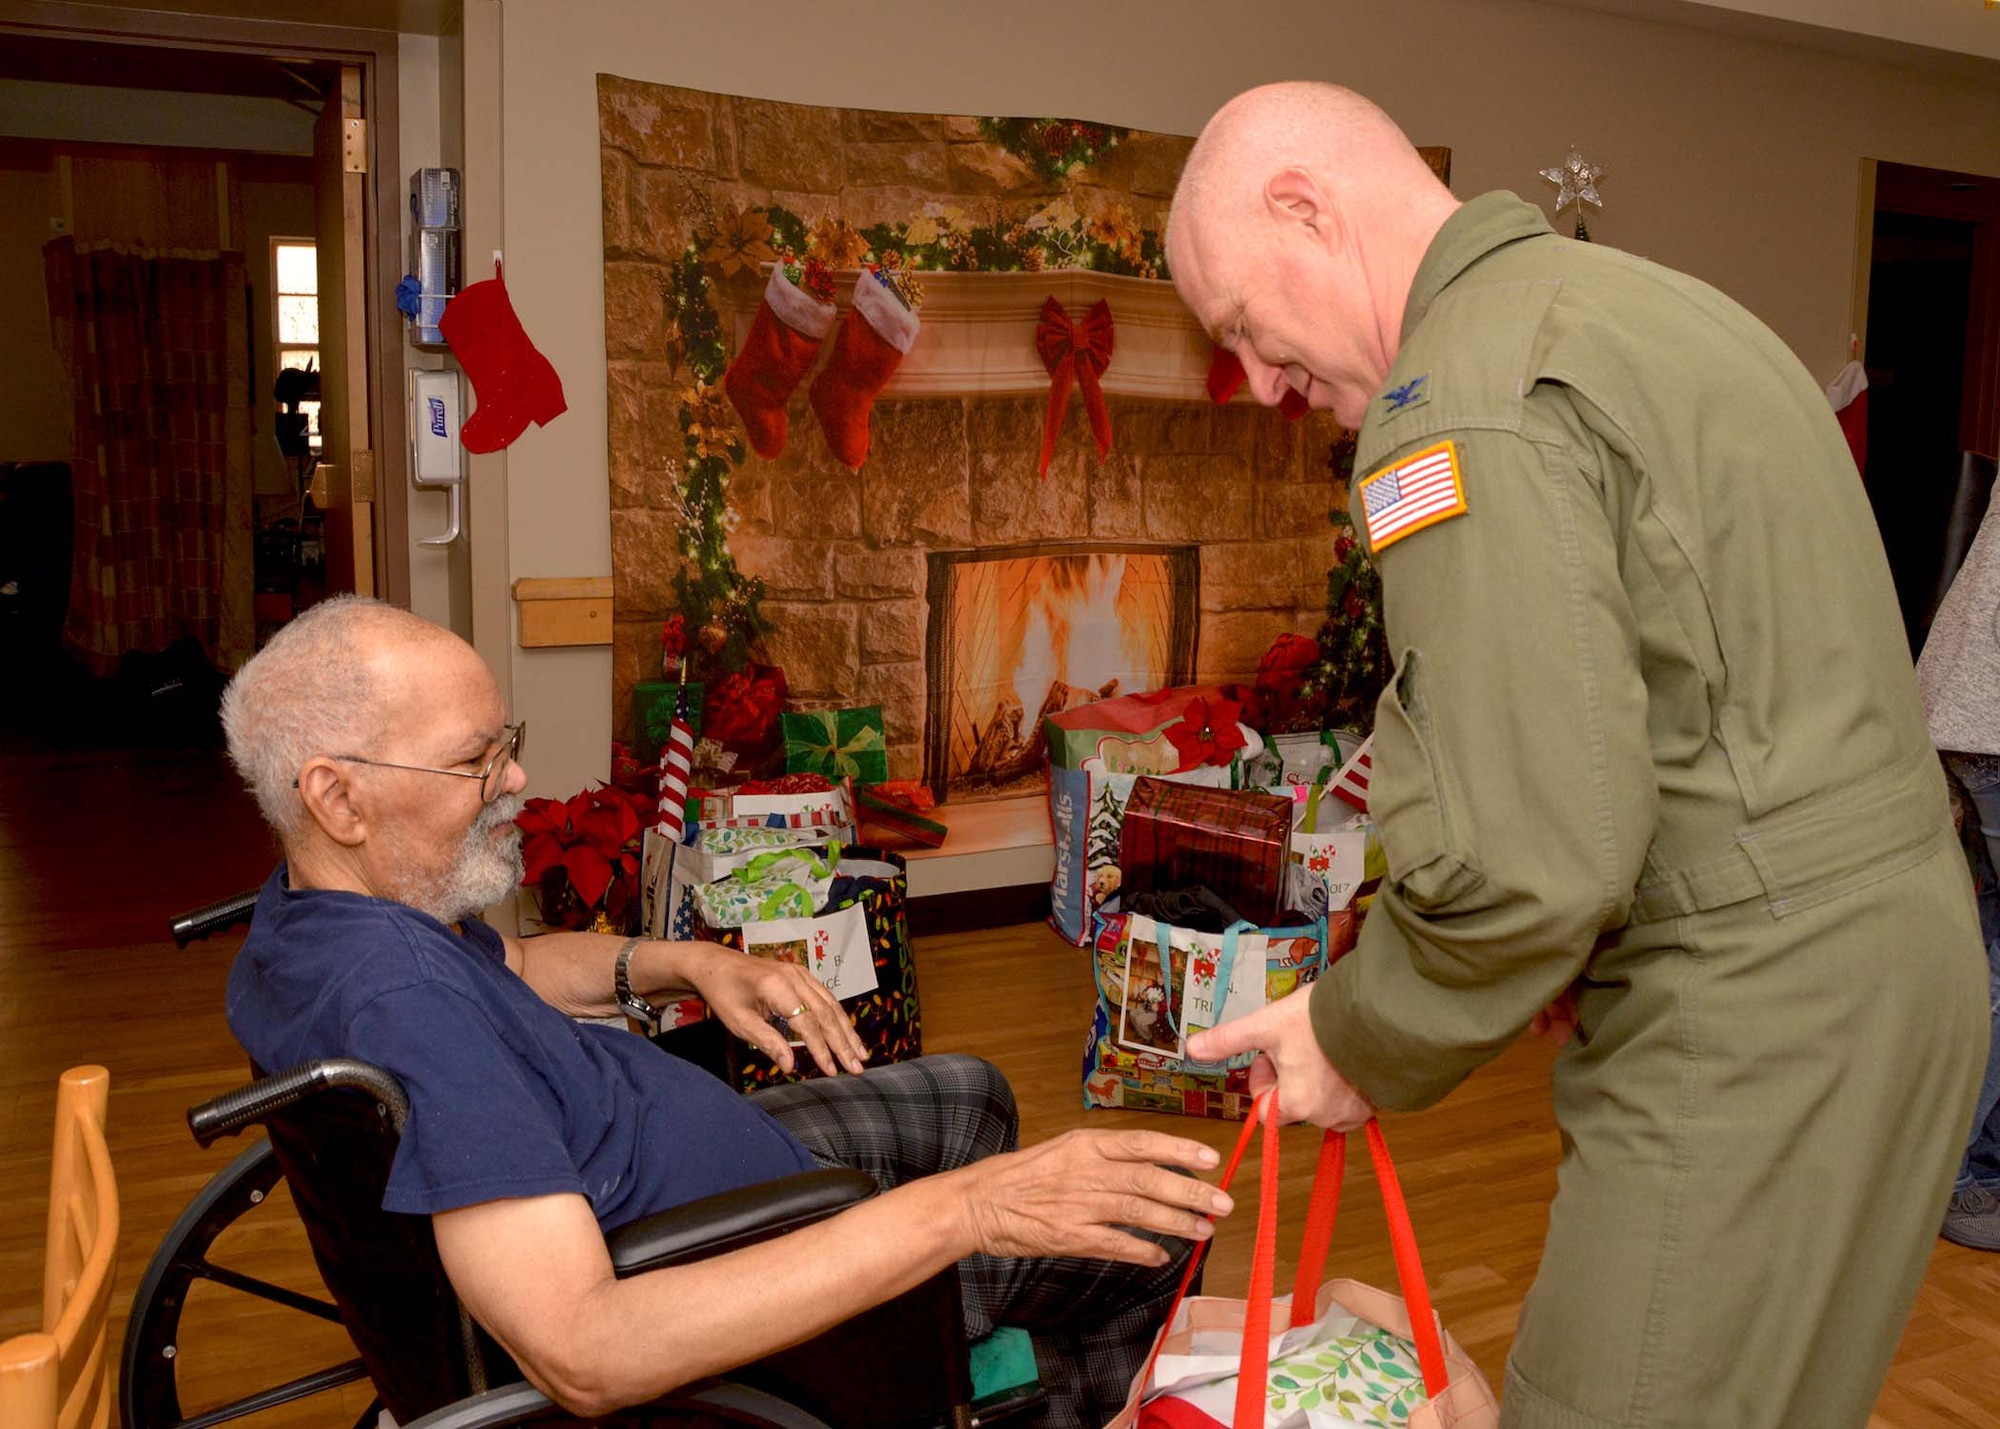 507th Air Refueling Wing Commander, Col. Miles Heaslip, helps a veteran open his gift Dec. 20, 2018, at the Norman Veterans Center in Norman, Oklahoma. 507th ARW Airmen visited the veterans to deliver gifts and serve snacks for the holidays. (U.S. Air Force photo by Tech. Sgt. Samantha Mathison)